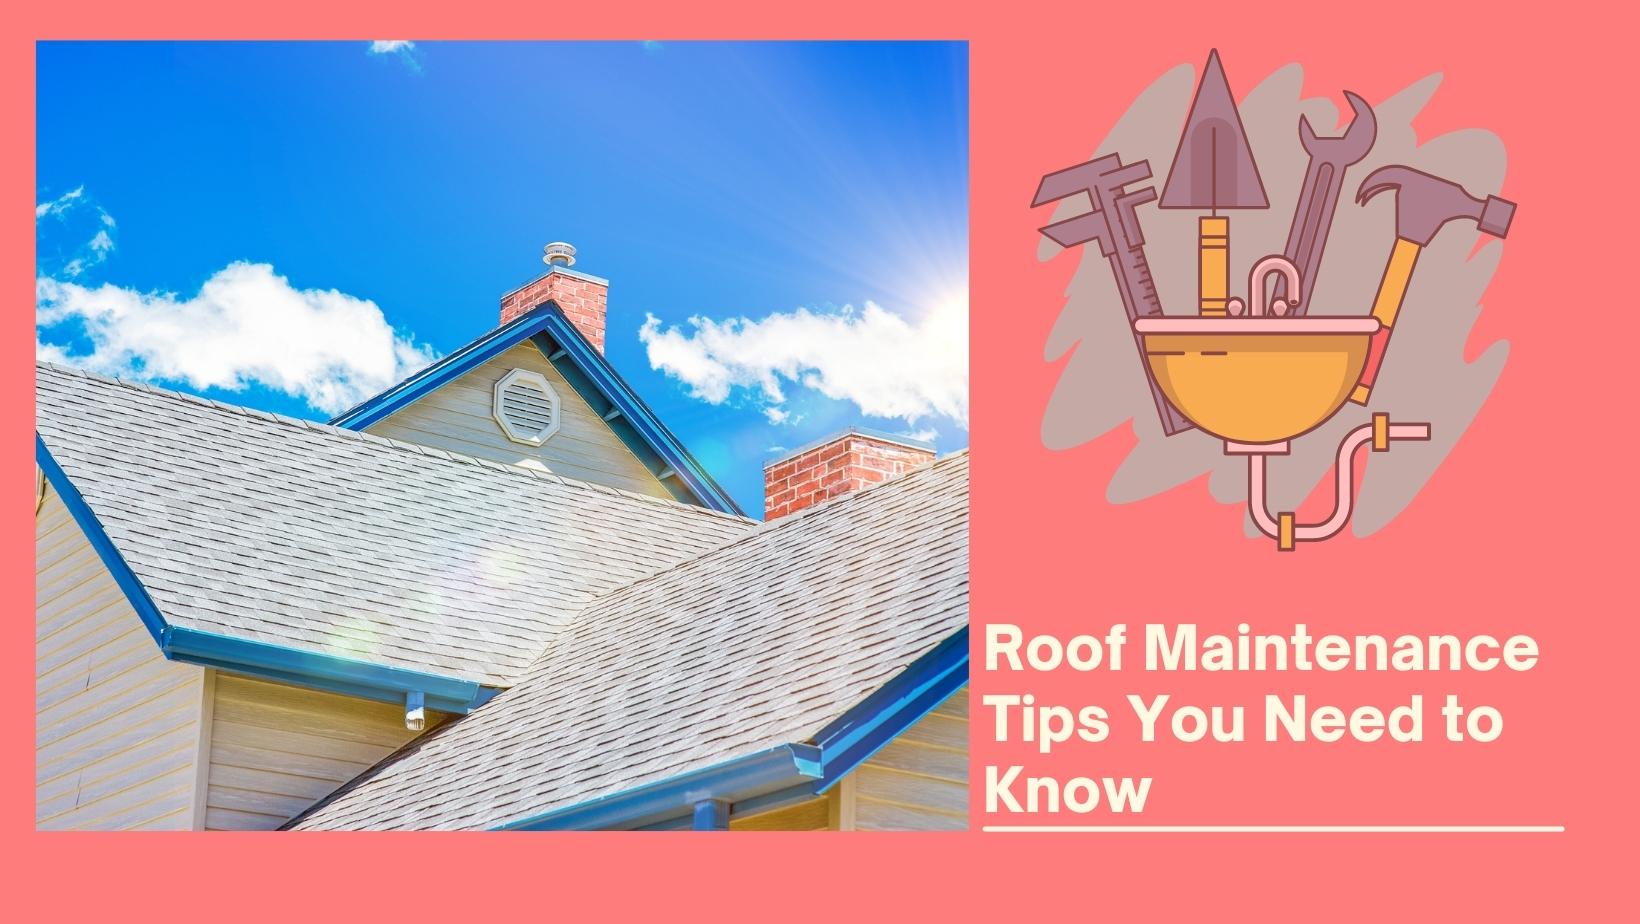 Roof Maintenance Tips You Need to Know